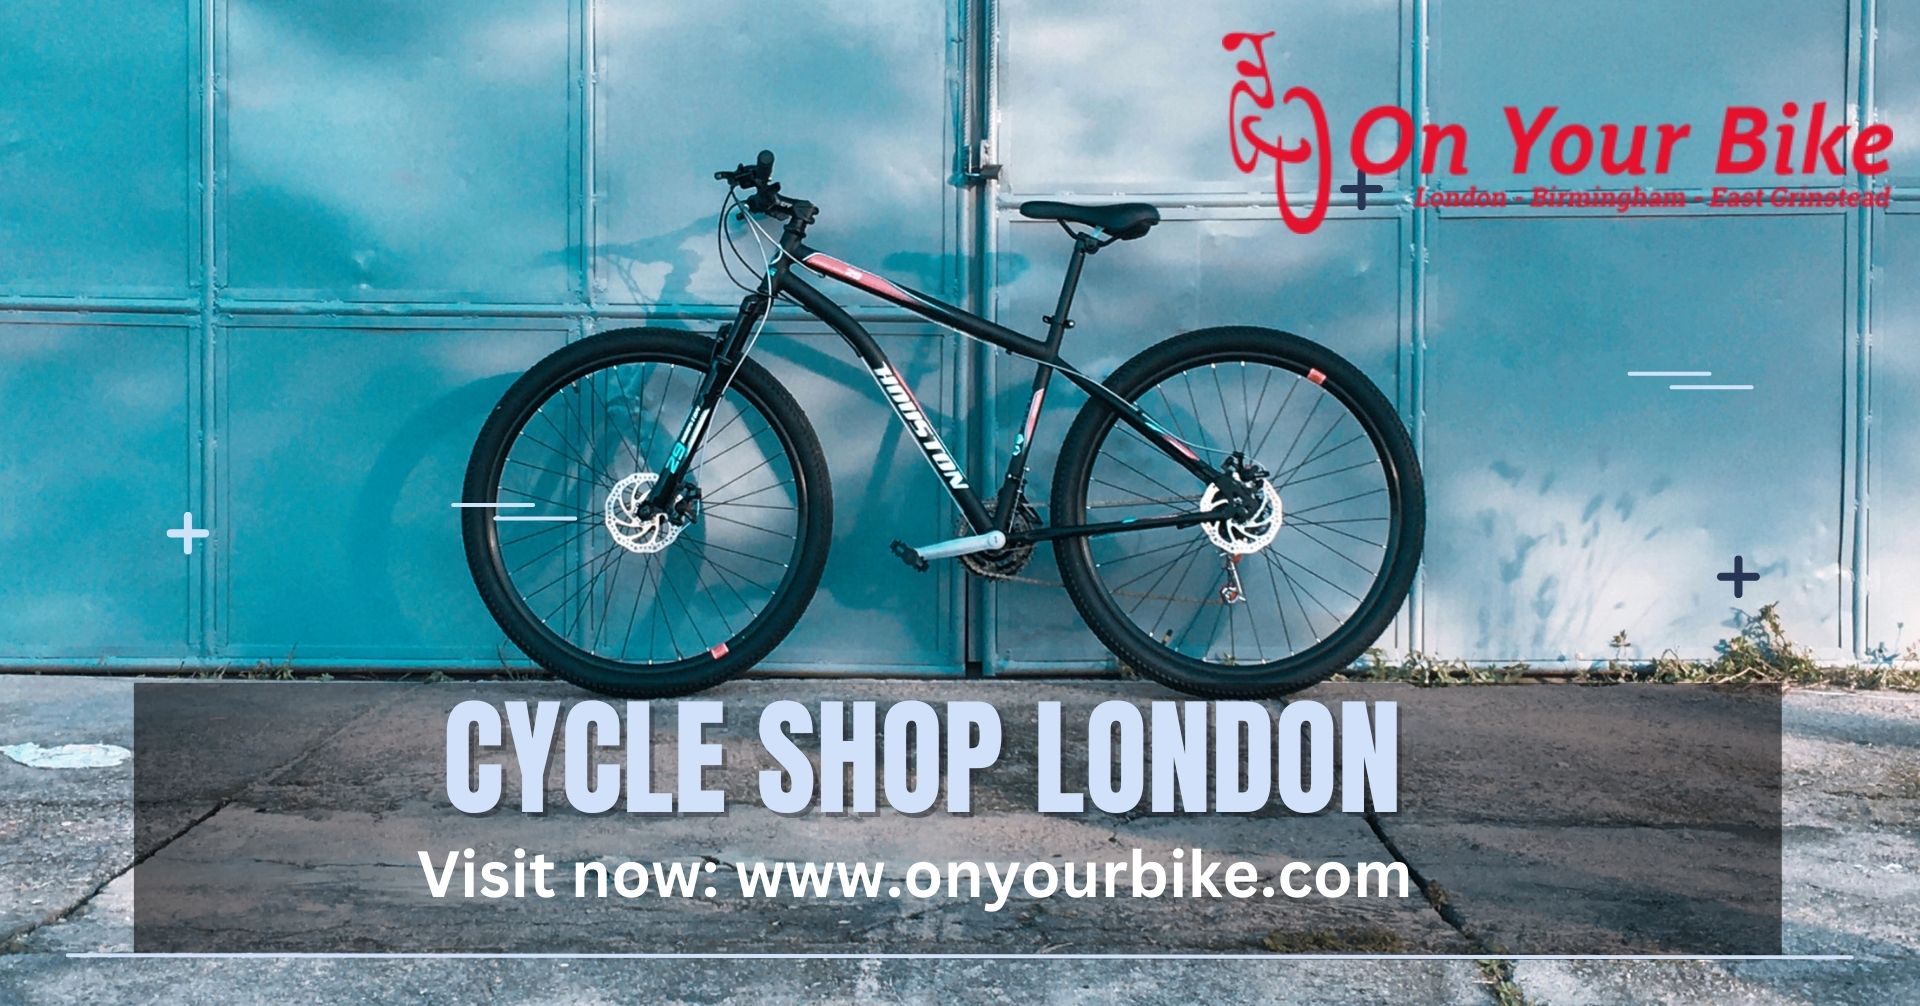 Your Ultimate Guide to Cycling: Cycle Shops London, Bike Repair London, and More